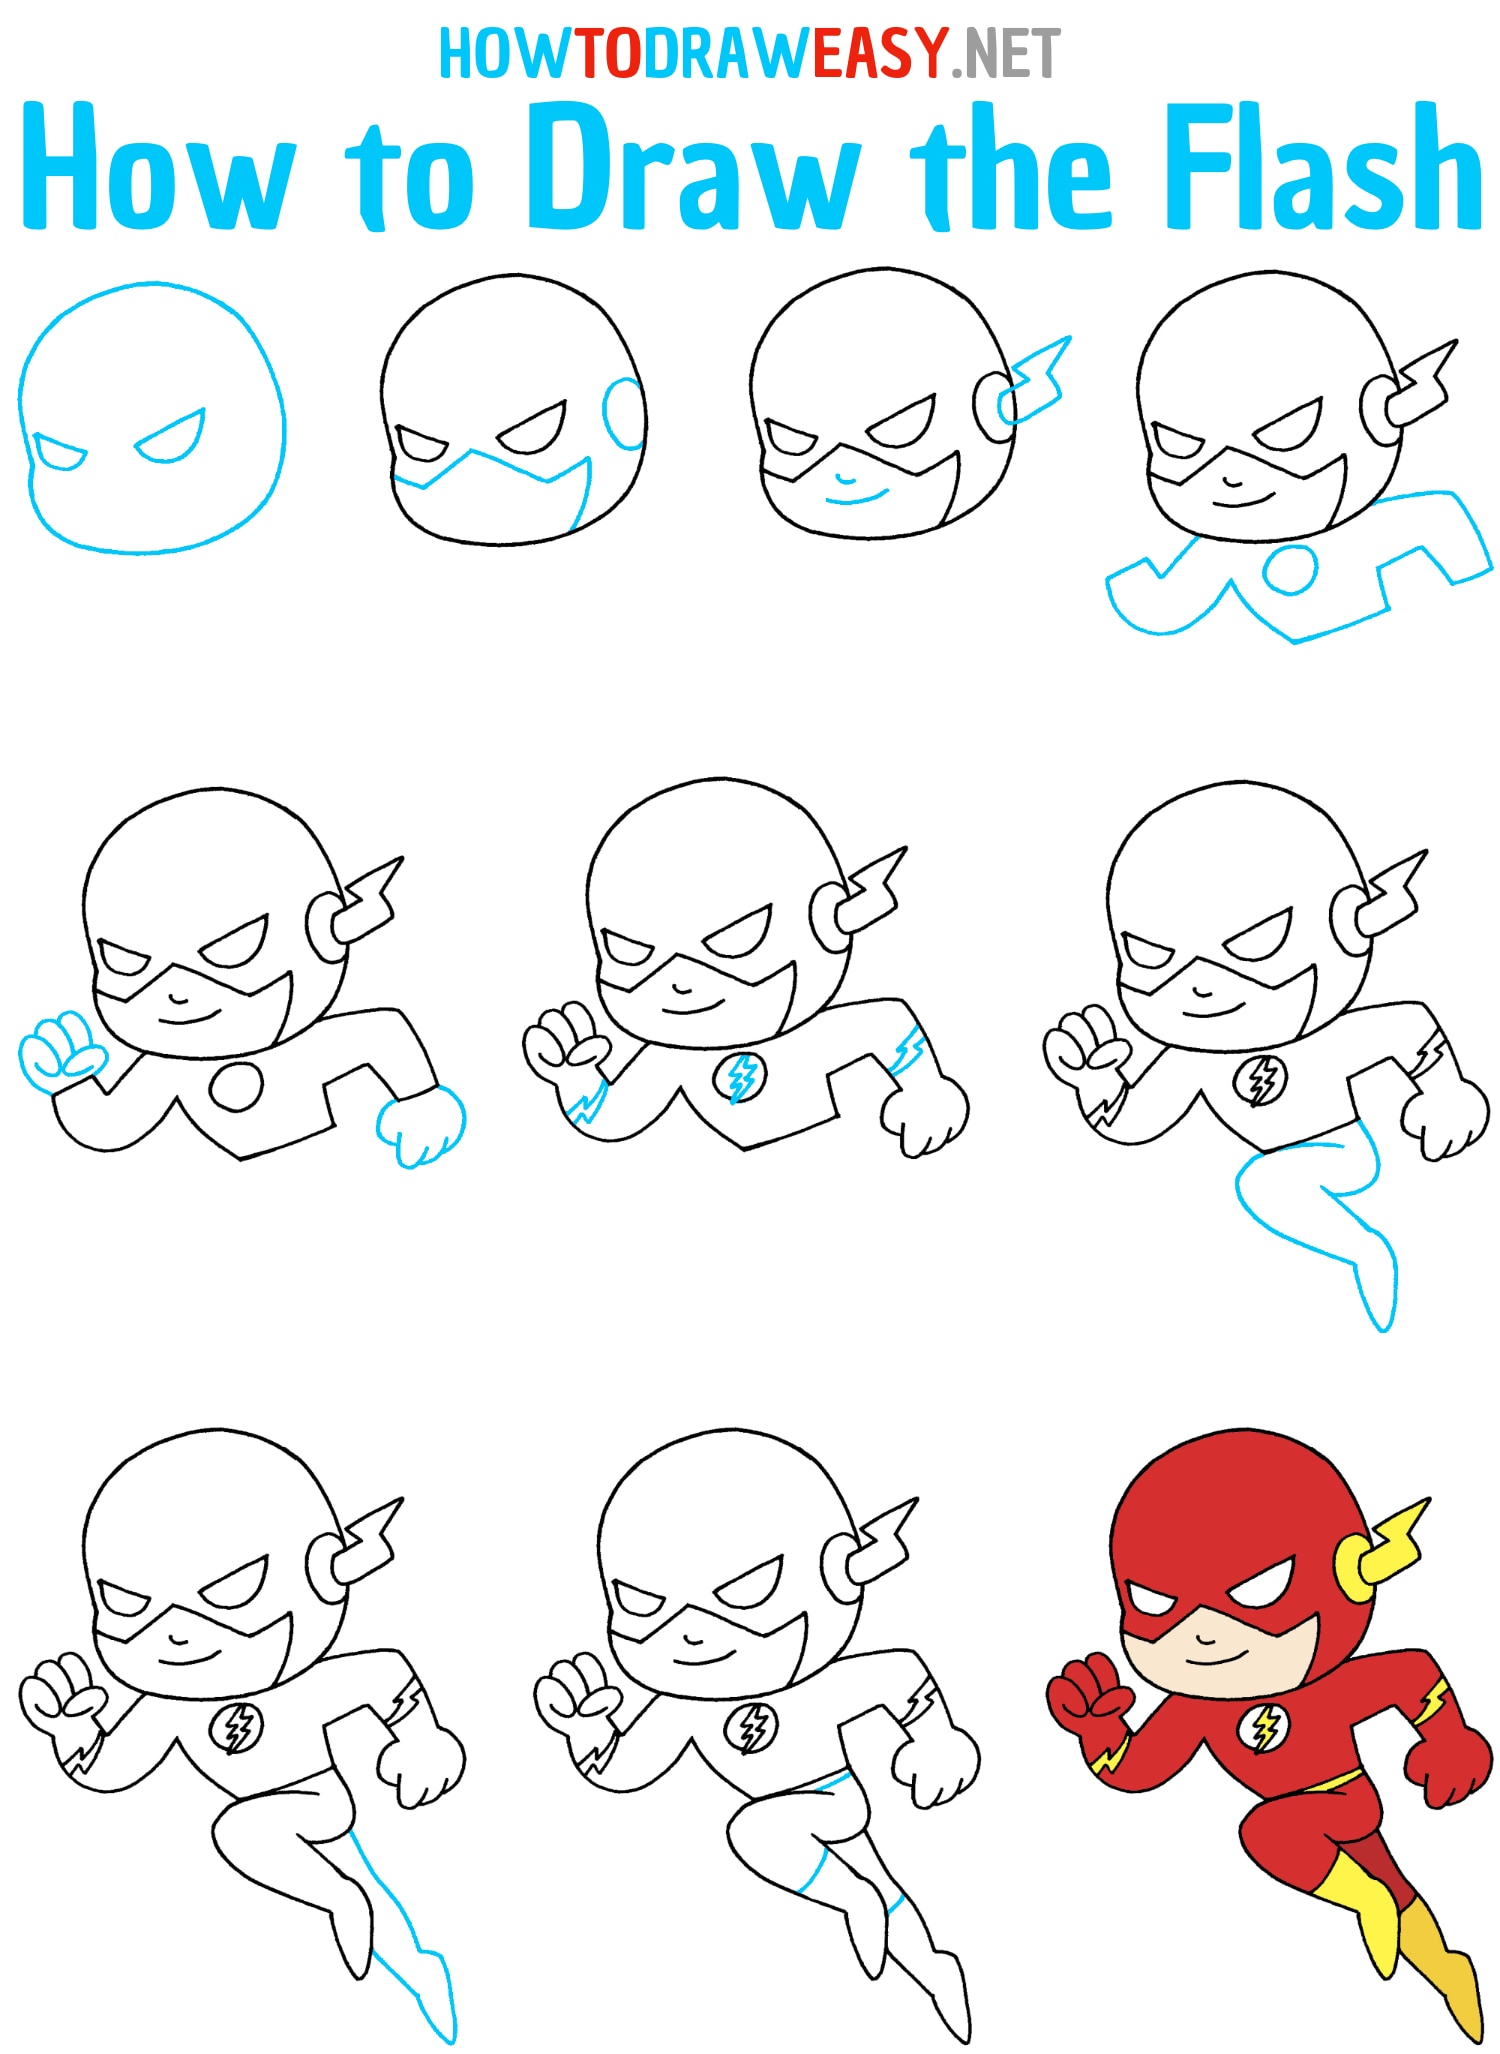 How to Draw the Flash Step by Step